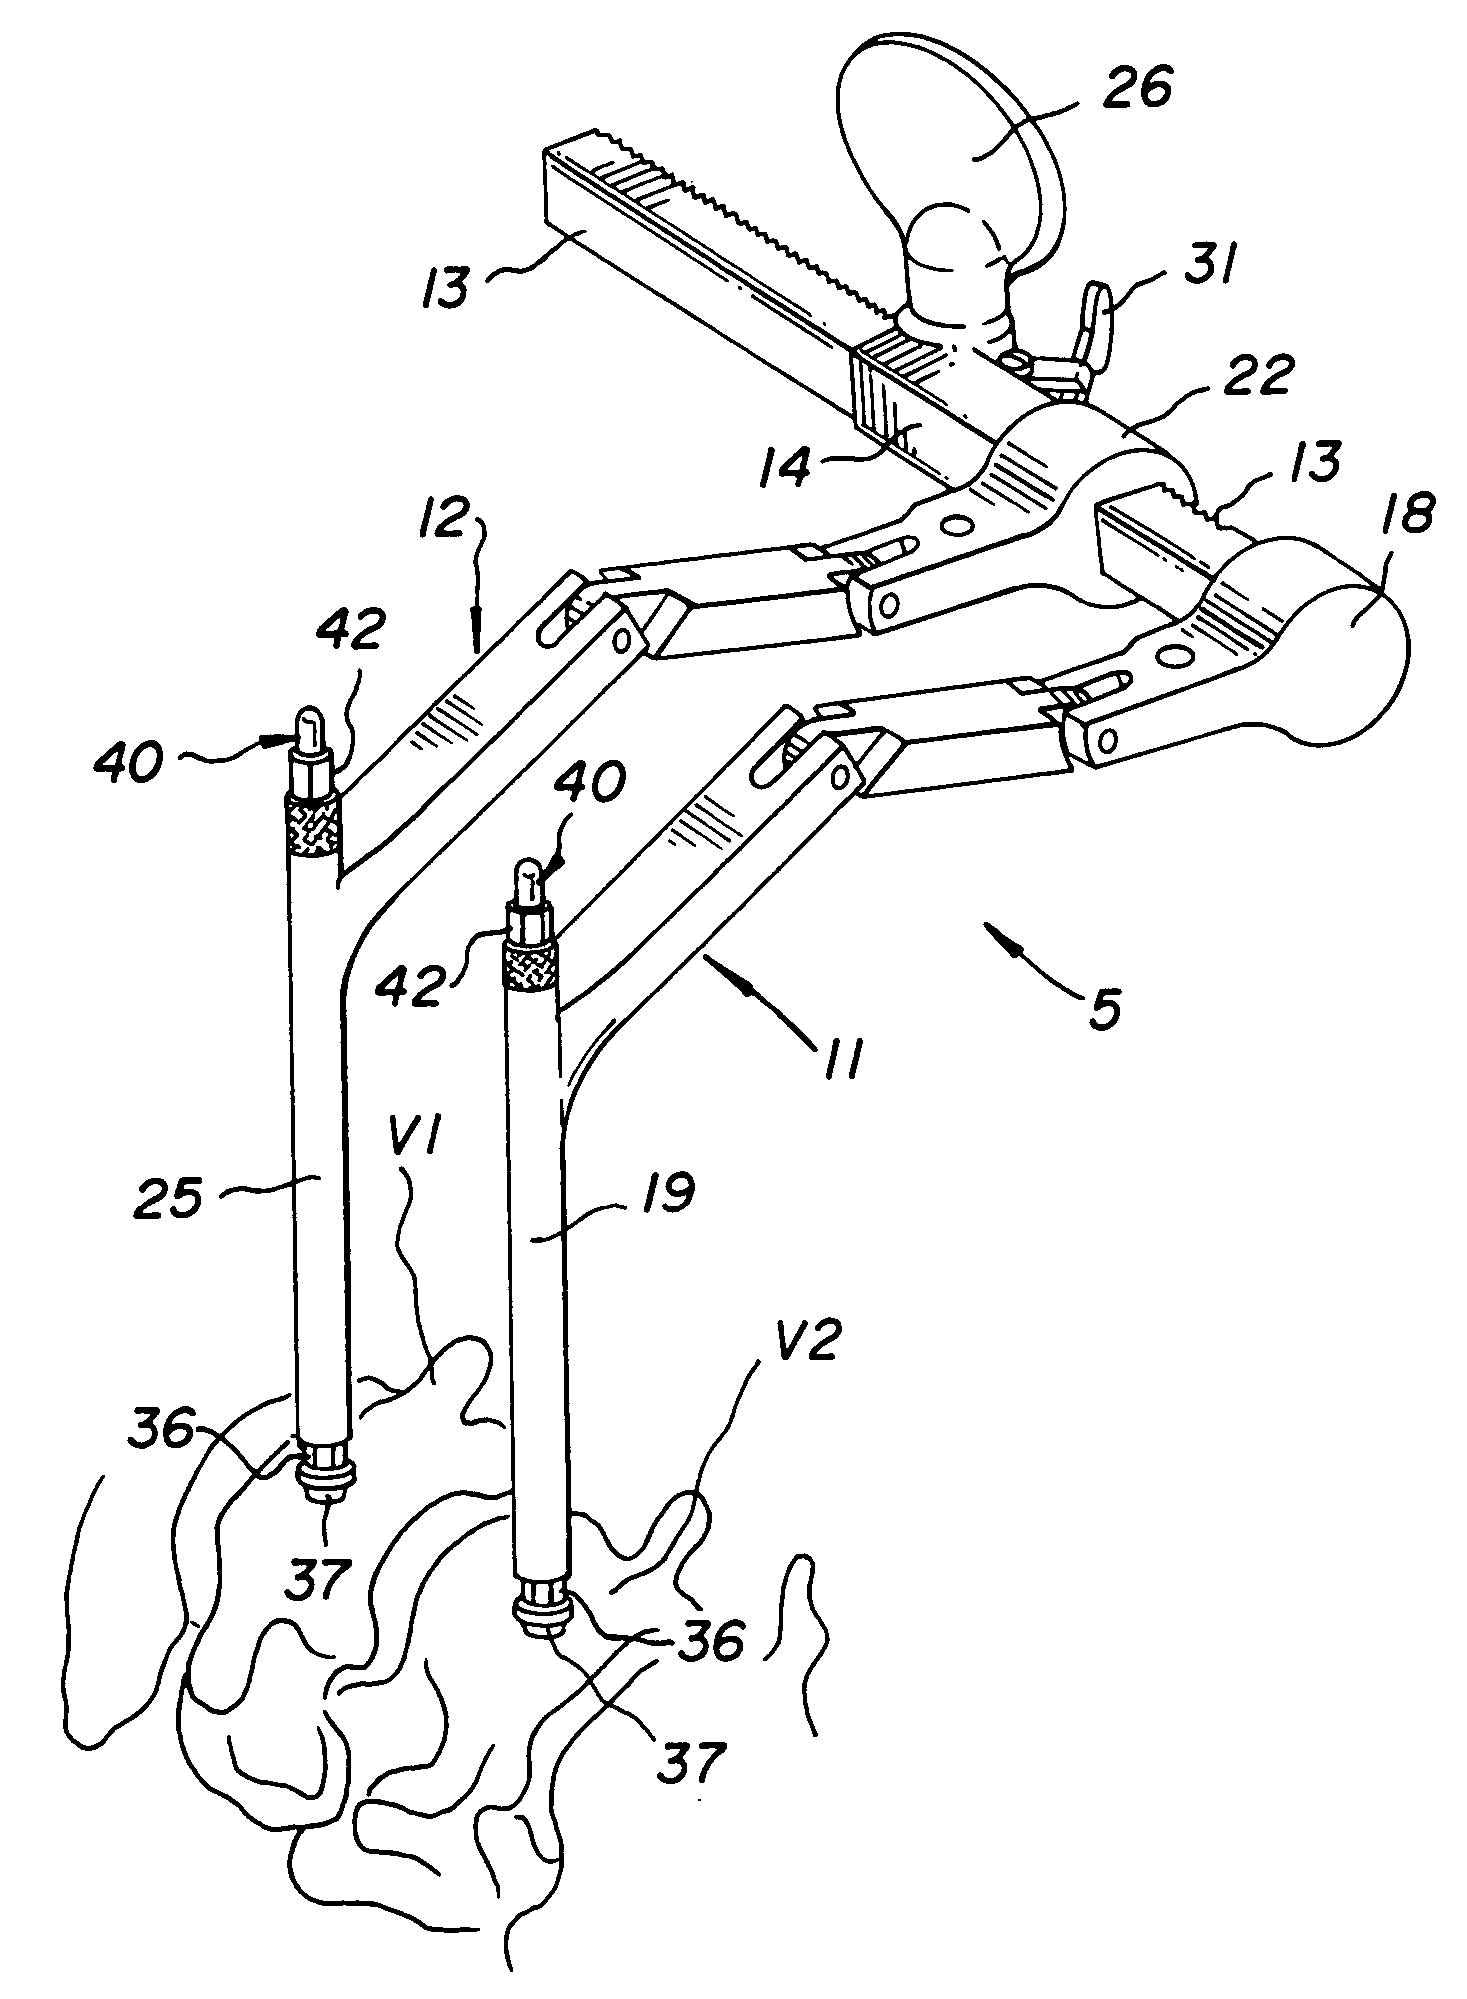 Vertebral retainer-distracter and method of using same